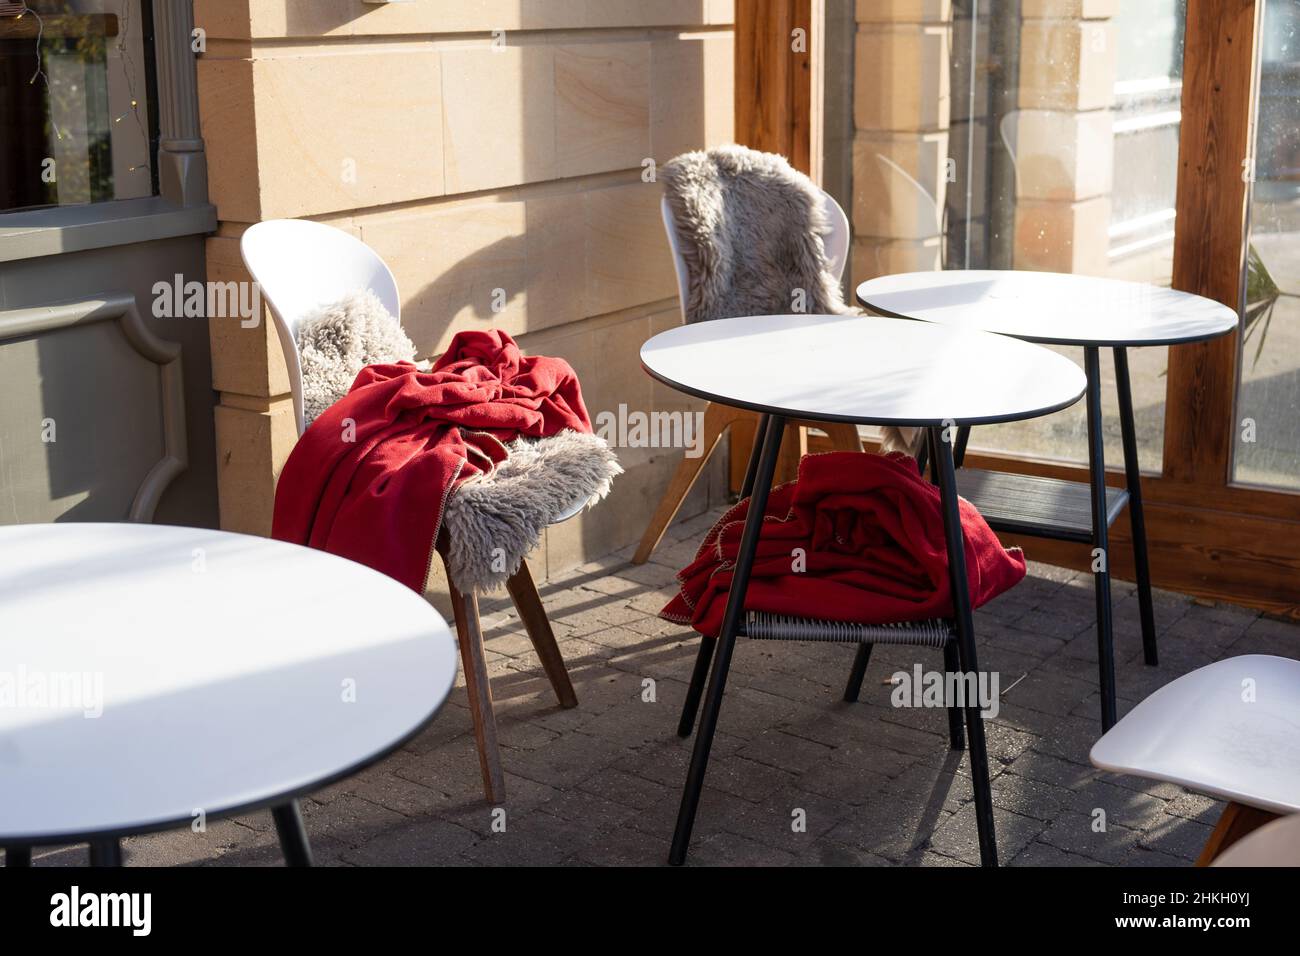 An independent restaurant provides seat covers and blankets to keep customers choosing to sit outdoors warm. Stock Photo